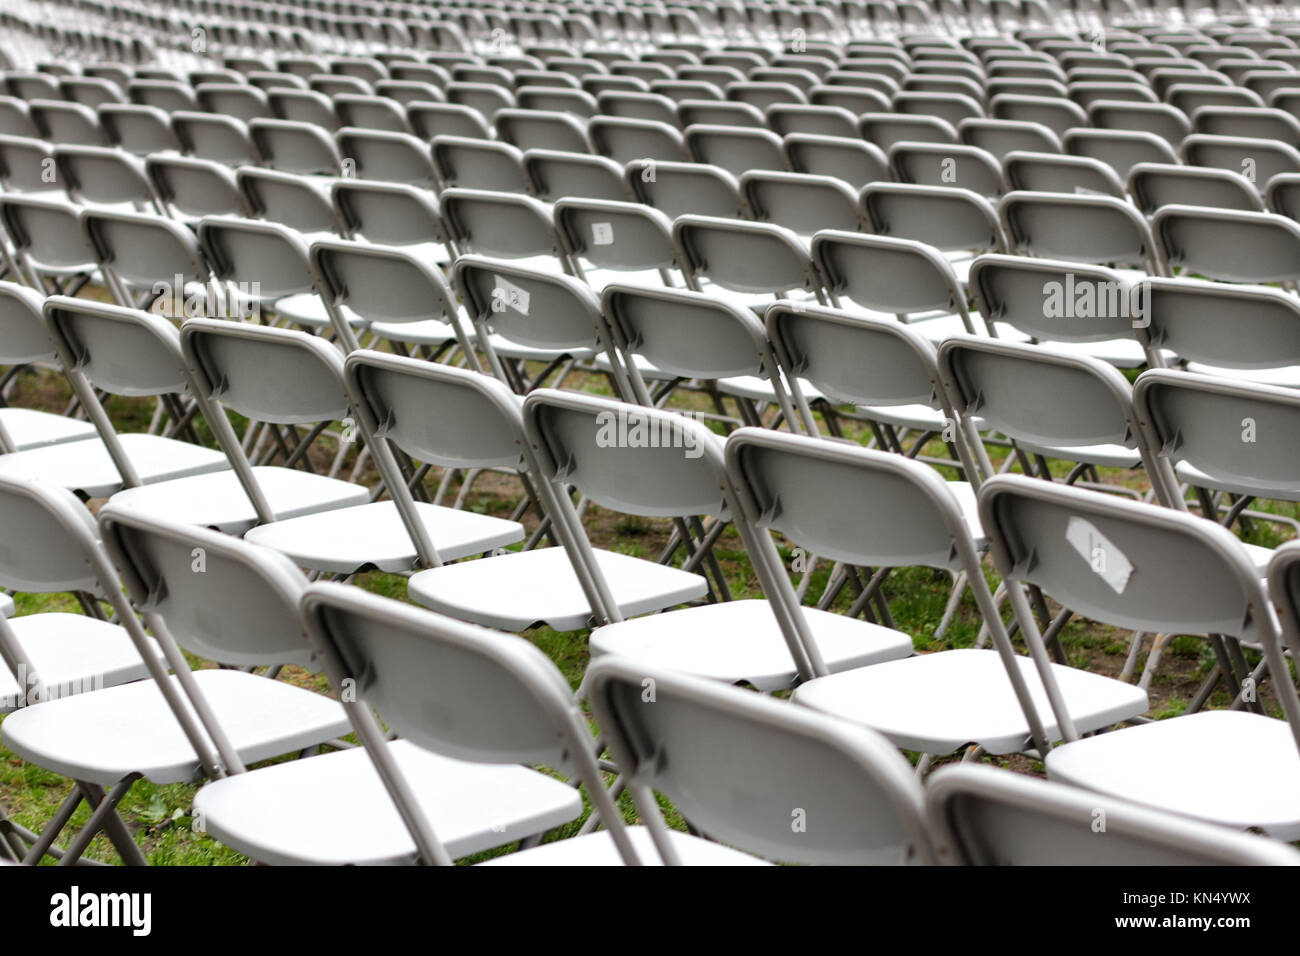 Row upon row of empty chairs waiting for the audience at a university graduation ceremony. Stock Photo